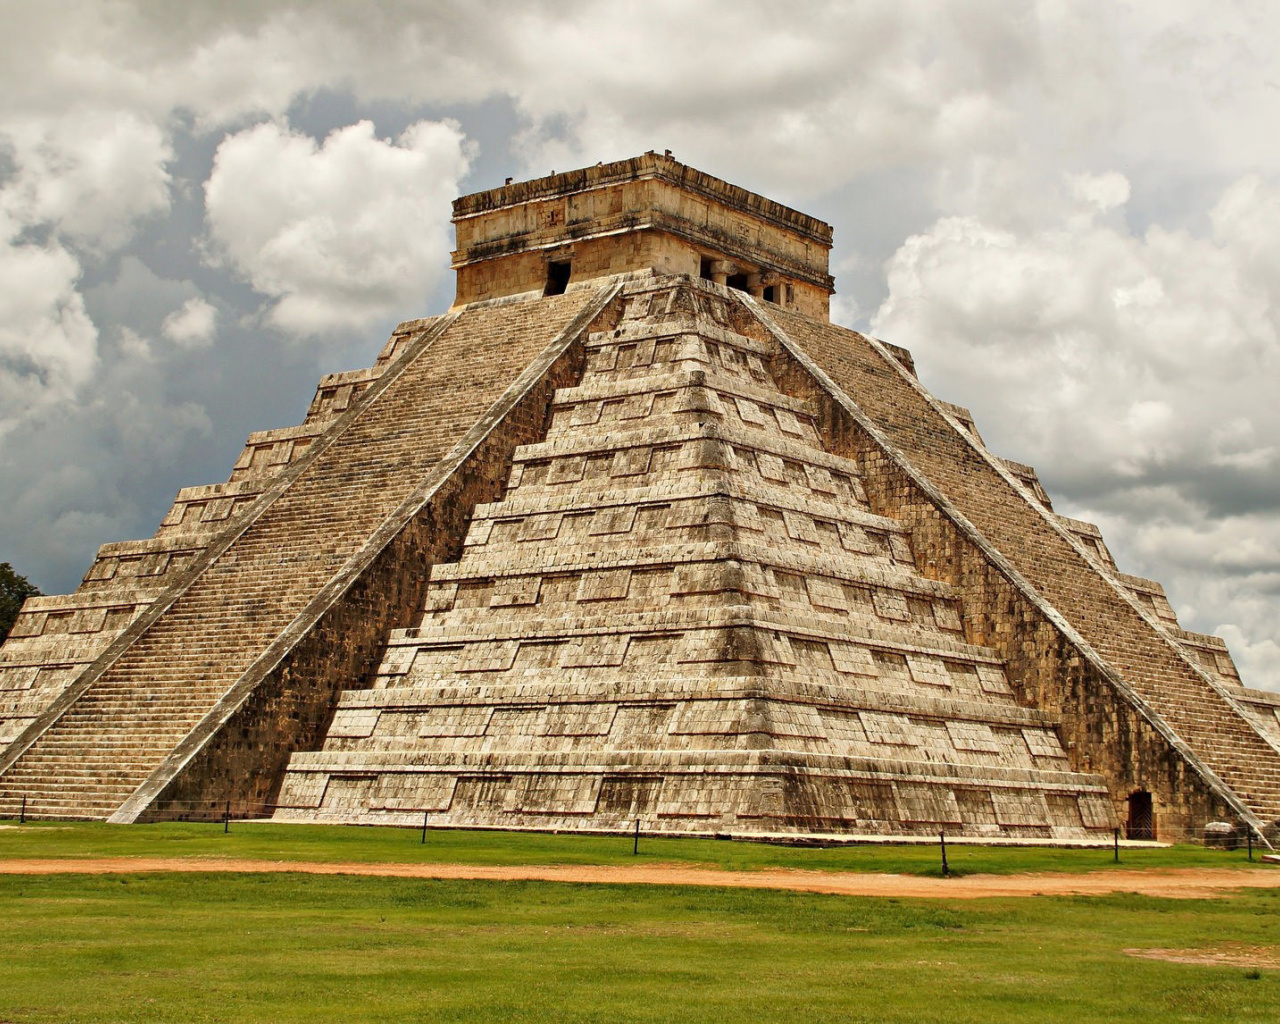 One of the 7 Wonders of the World Chichen Itza Pyramid wallpaper 1280x1024